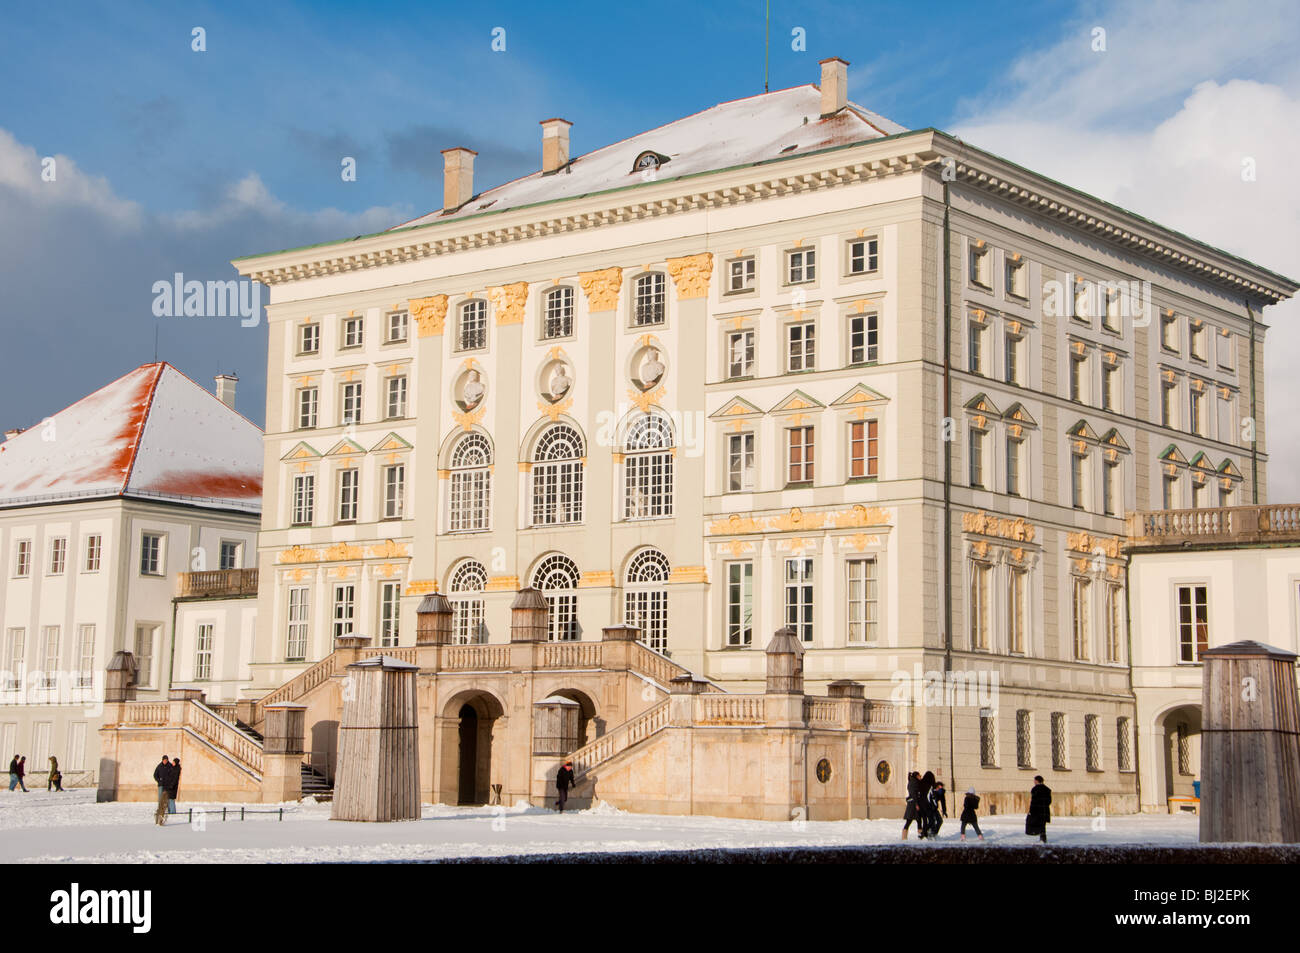 Nymphenburg palace in the snow. Munich, Germany. Stock Photo